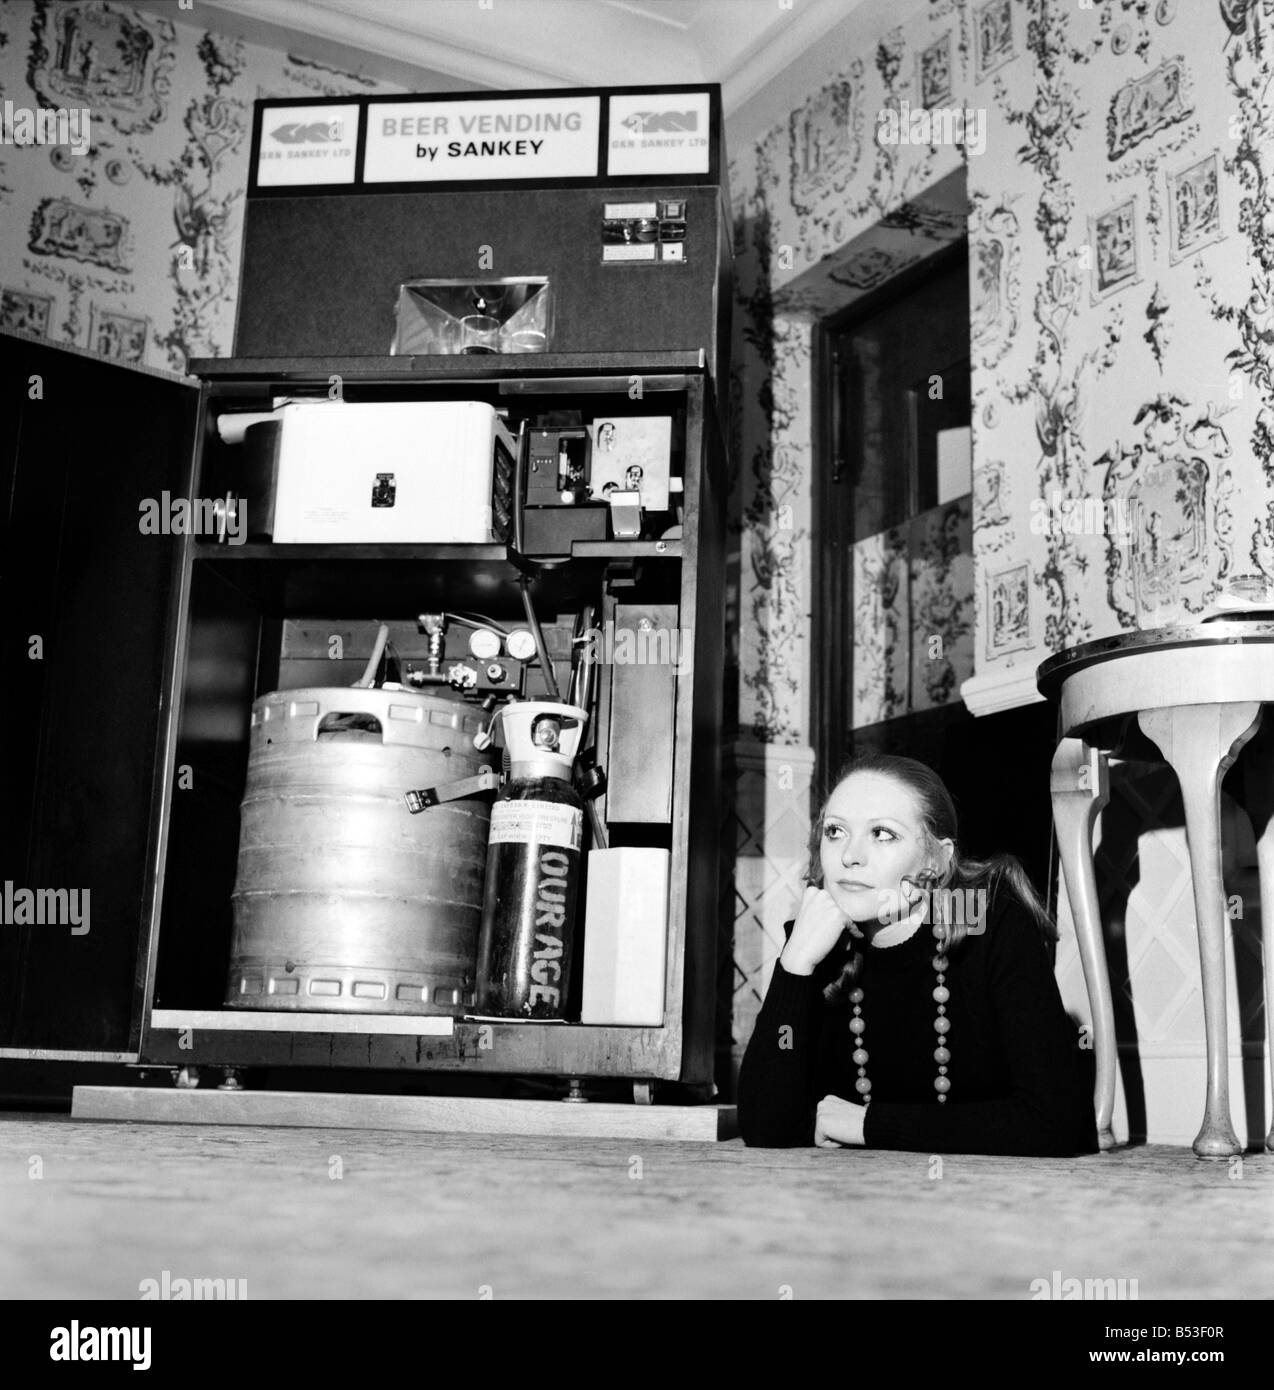 Inventions: Britain's first automatic refrigerated draught beer vending machine was demonstrated by the Brewery Division of GKN Sankey Ltd., of Bilston Staffs, at Quaglino's Bury Street, London. Woman with the front of the autobarmaid open showing the interior. December 1969 Z11595-001 Stock Photo